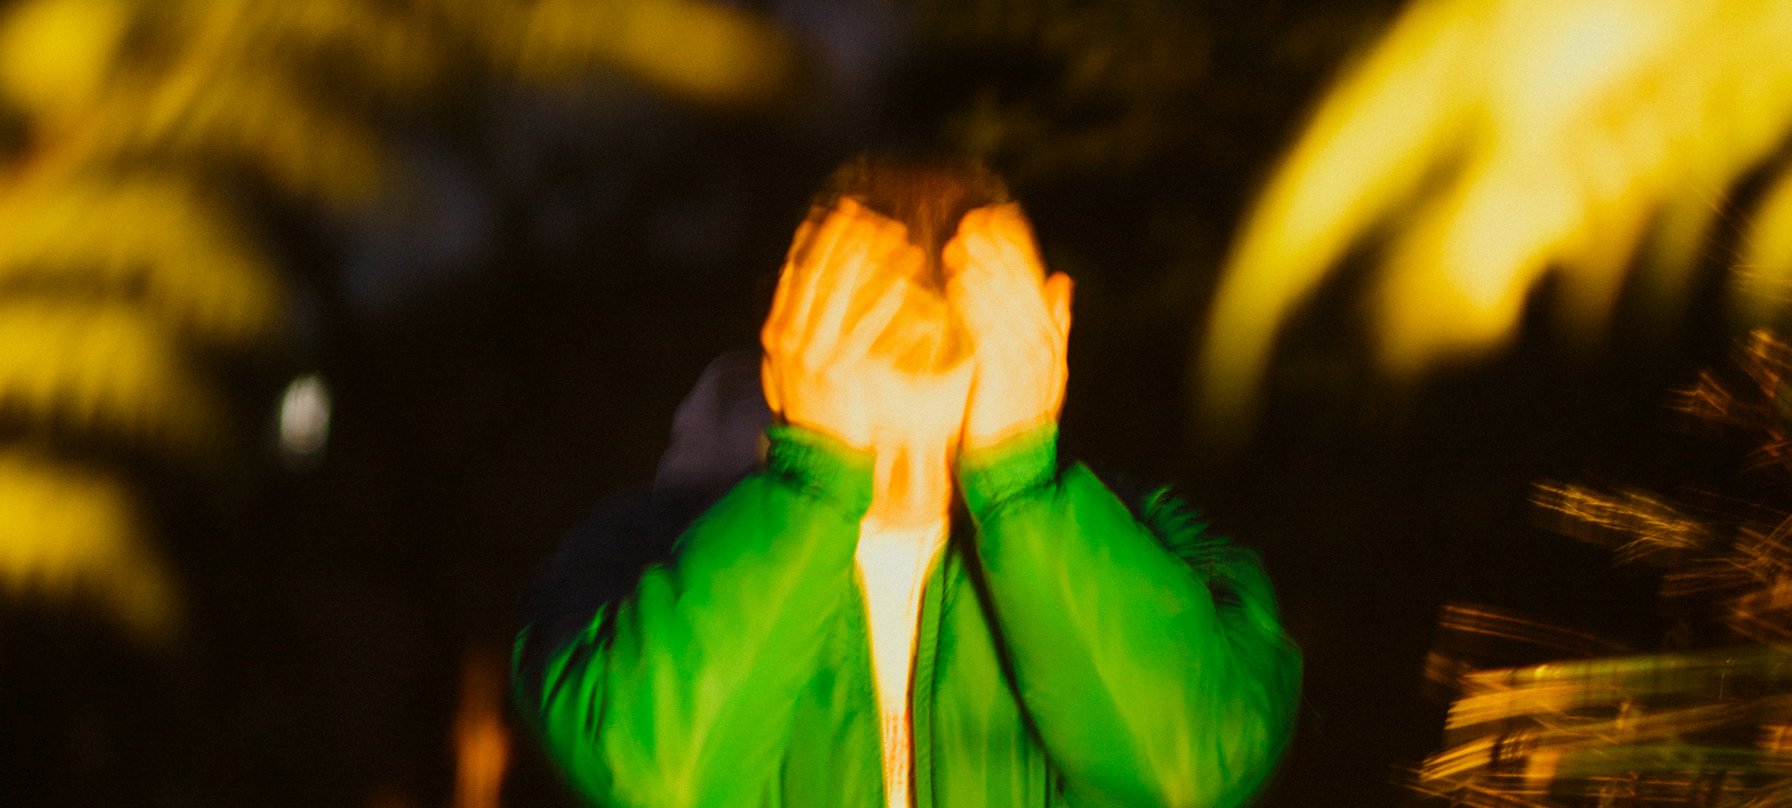 A photo of Godrich standinh amongst tall grass, wearing a bright green jacket and with their hands covering their eyes. Bright light warps this photo making the image look gliched. Credit Thomas Wood.